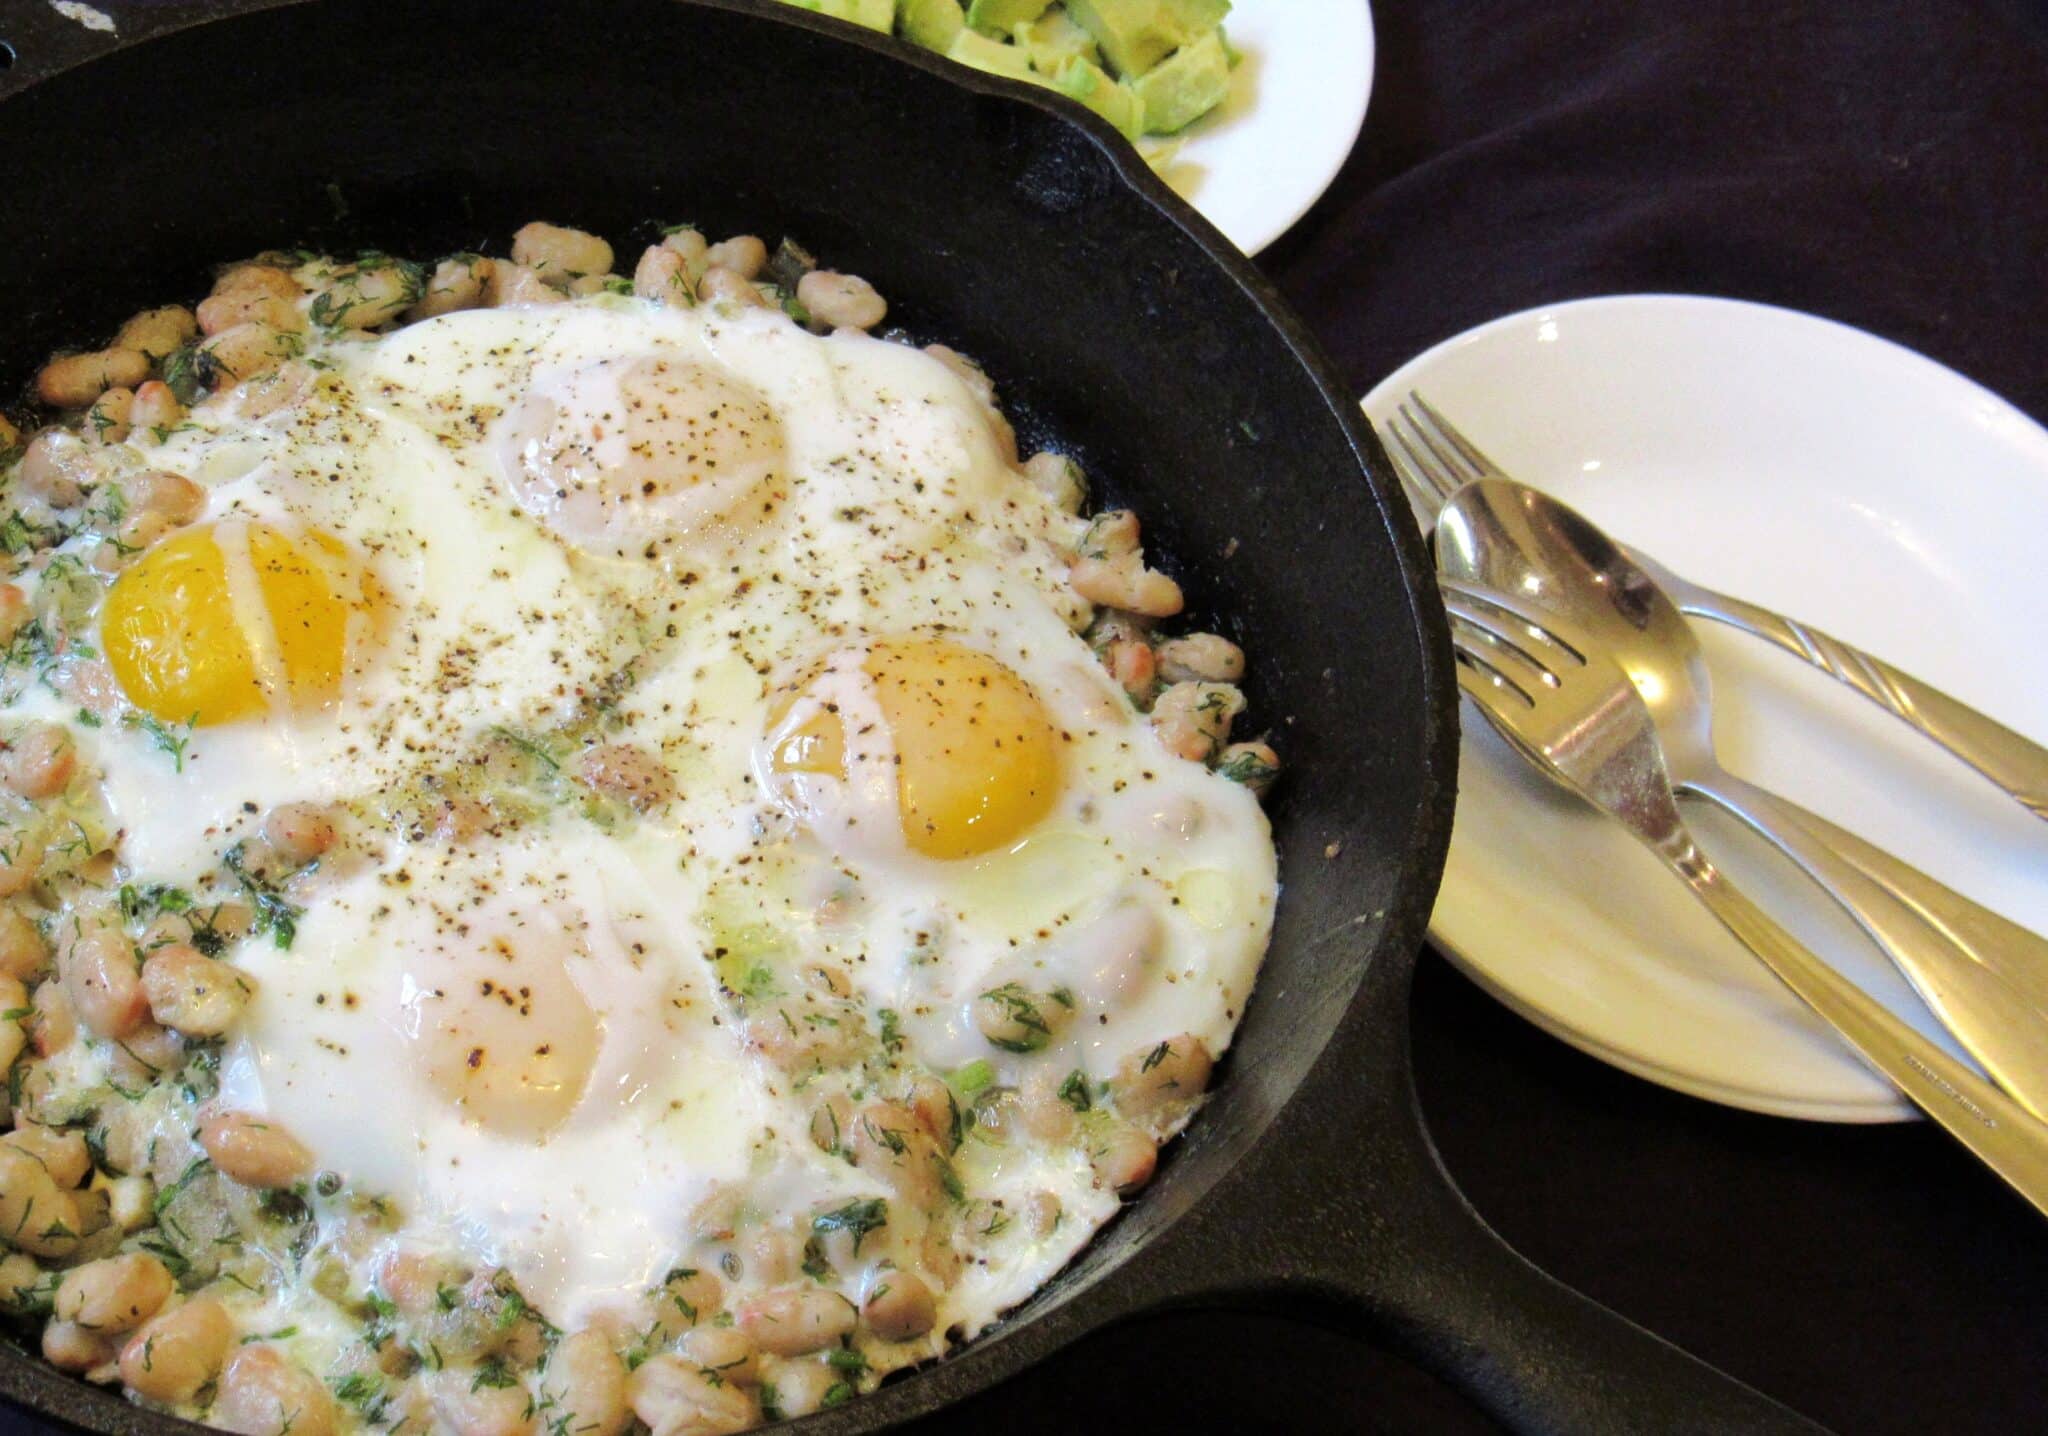 Eggs and beans for breakfast.